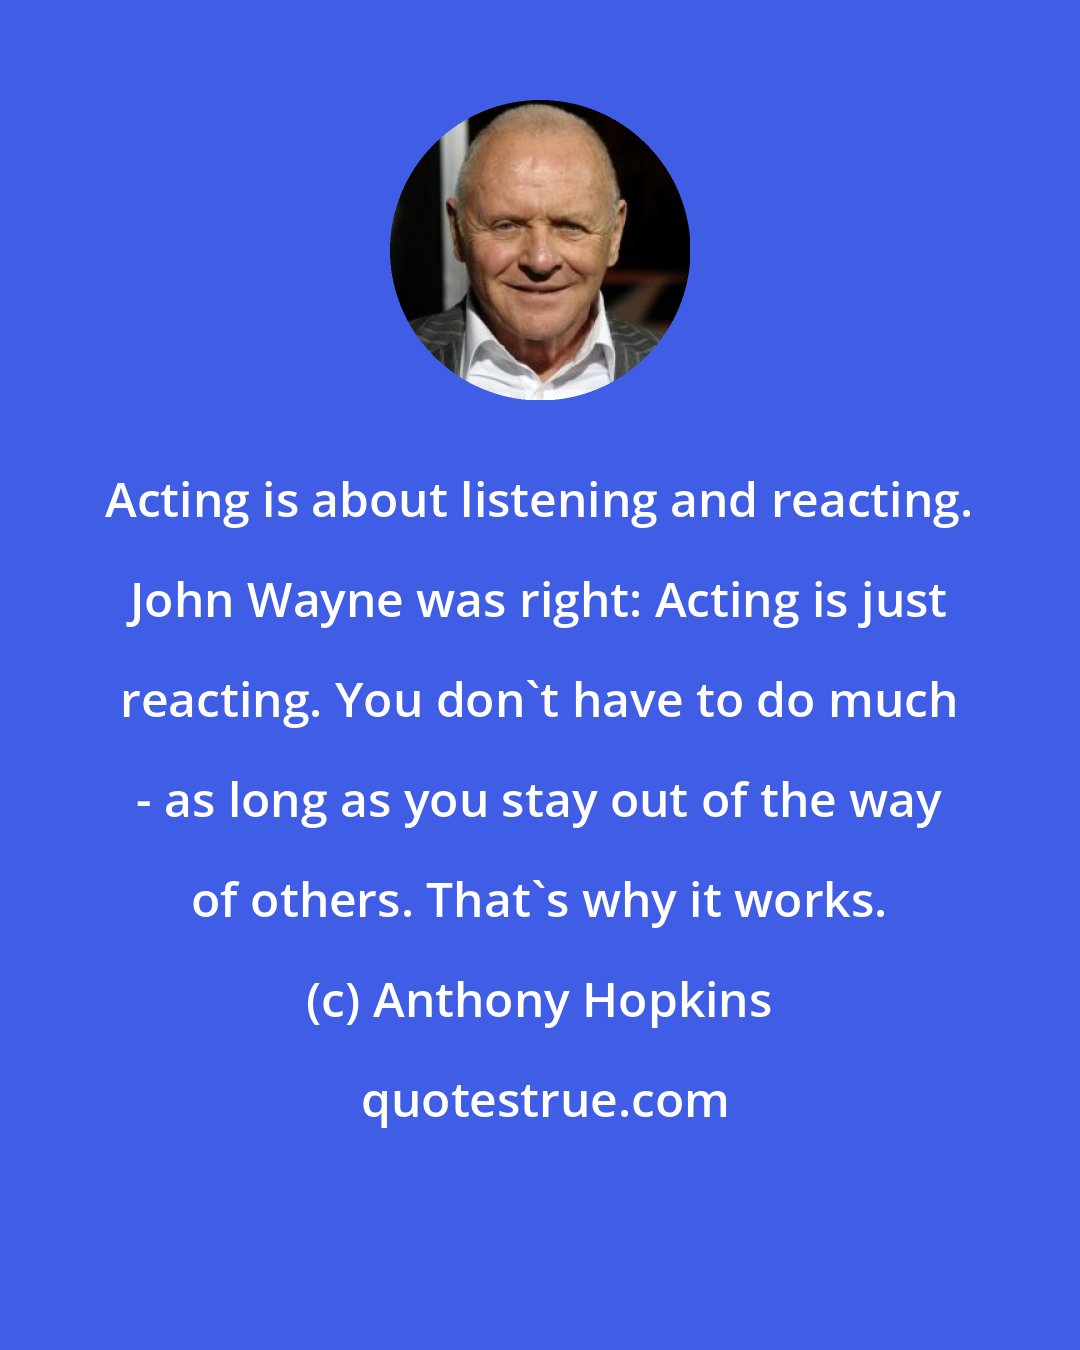 Anthony Hopkins: Acting is about listening and reacting. John Wayne was right: Acting is just reacting. You don't have to do much - as long as you stay out of the way of others. That's why it works.